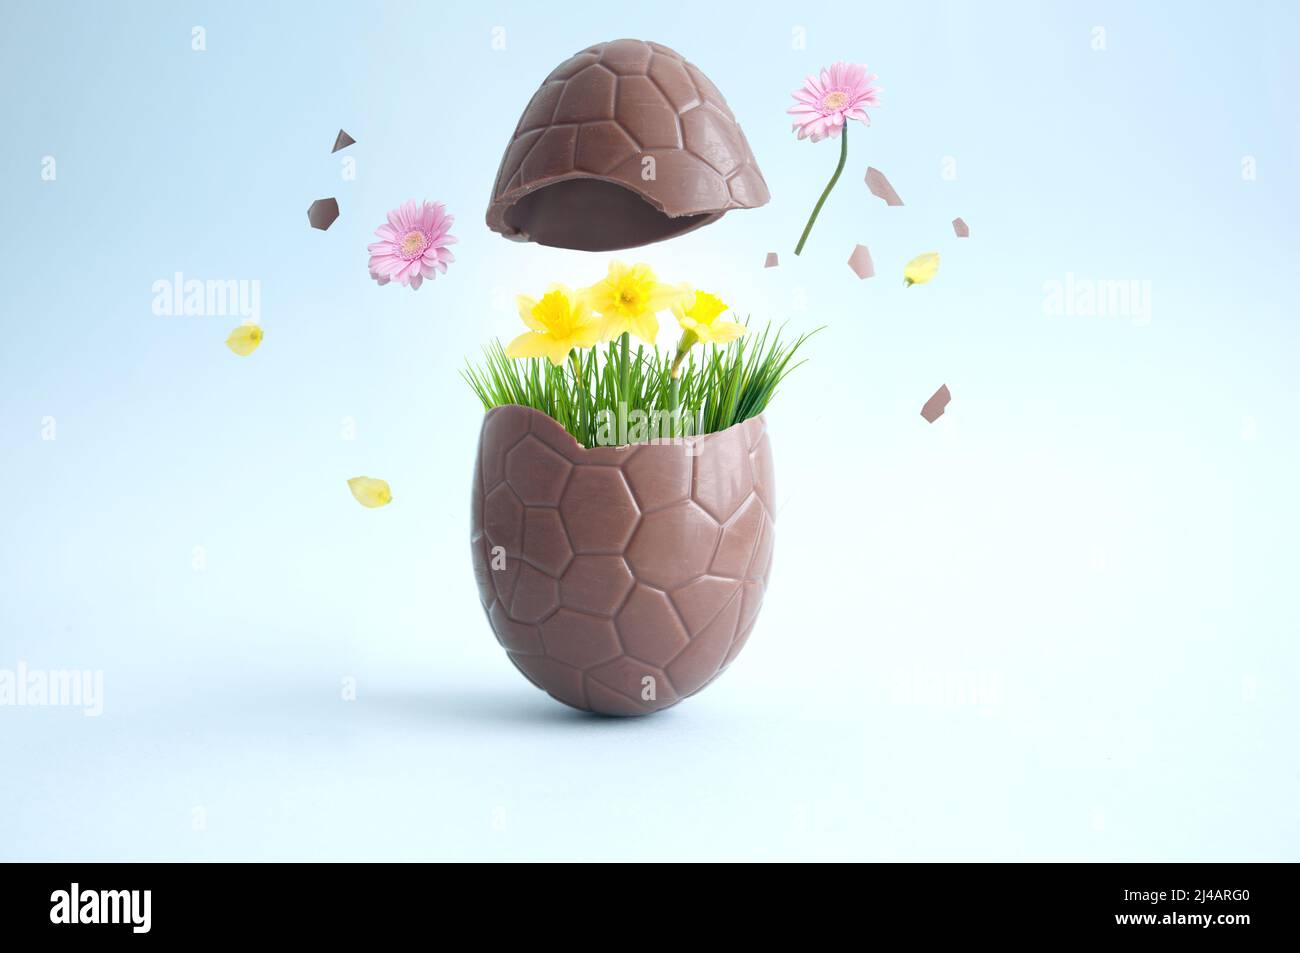 Chocolate easter egg cracking open with explosion of spring flowers Stock Photo